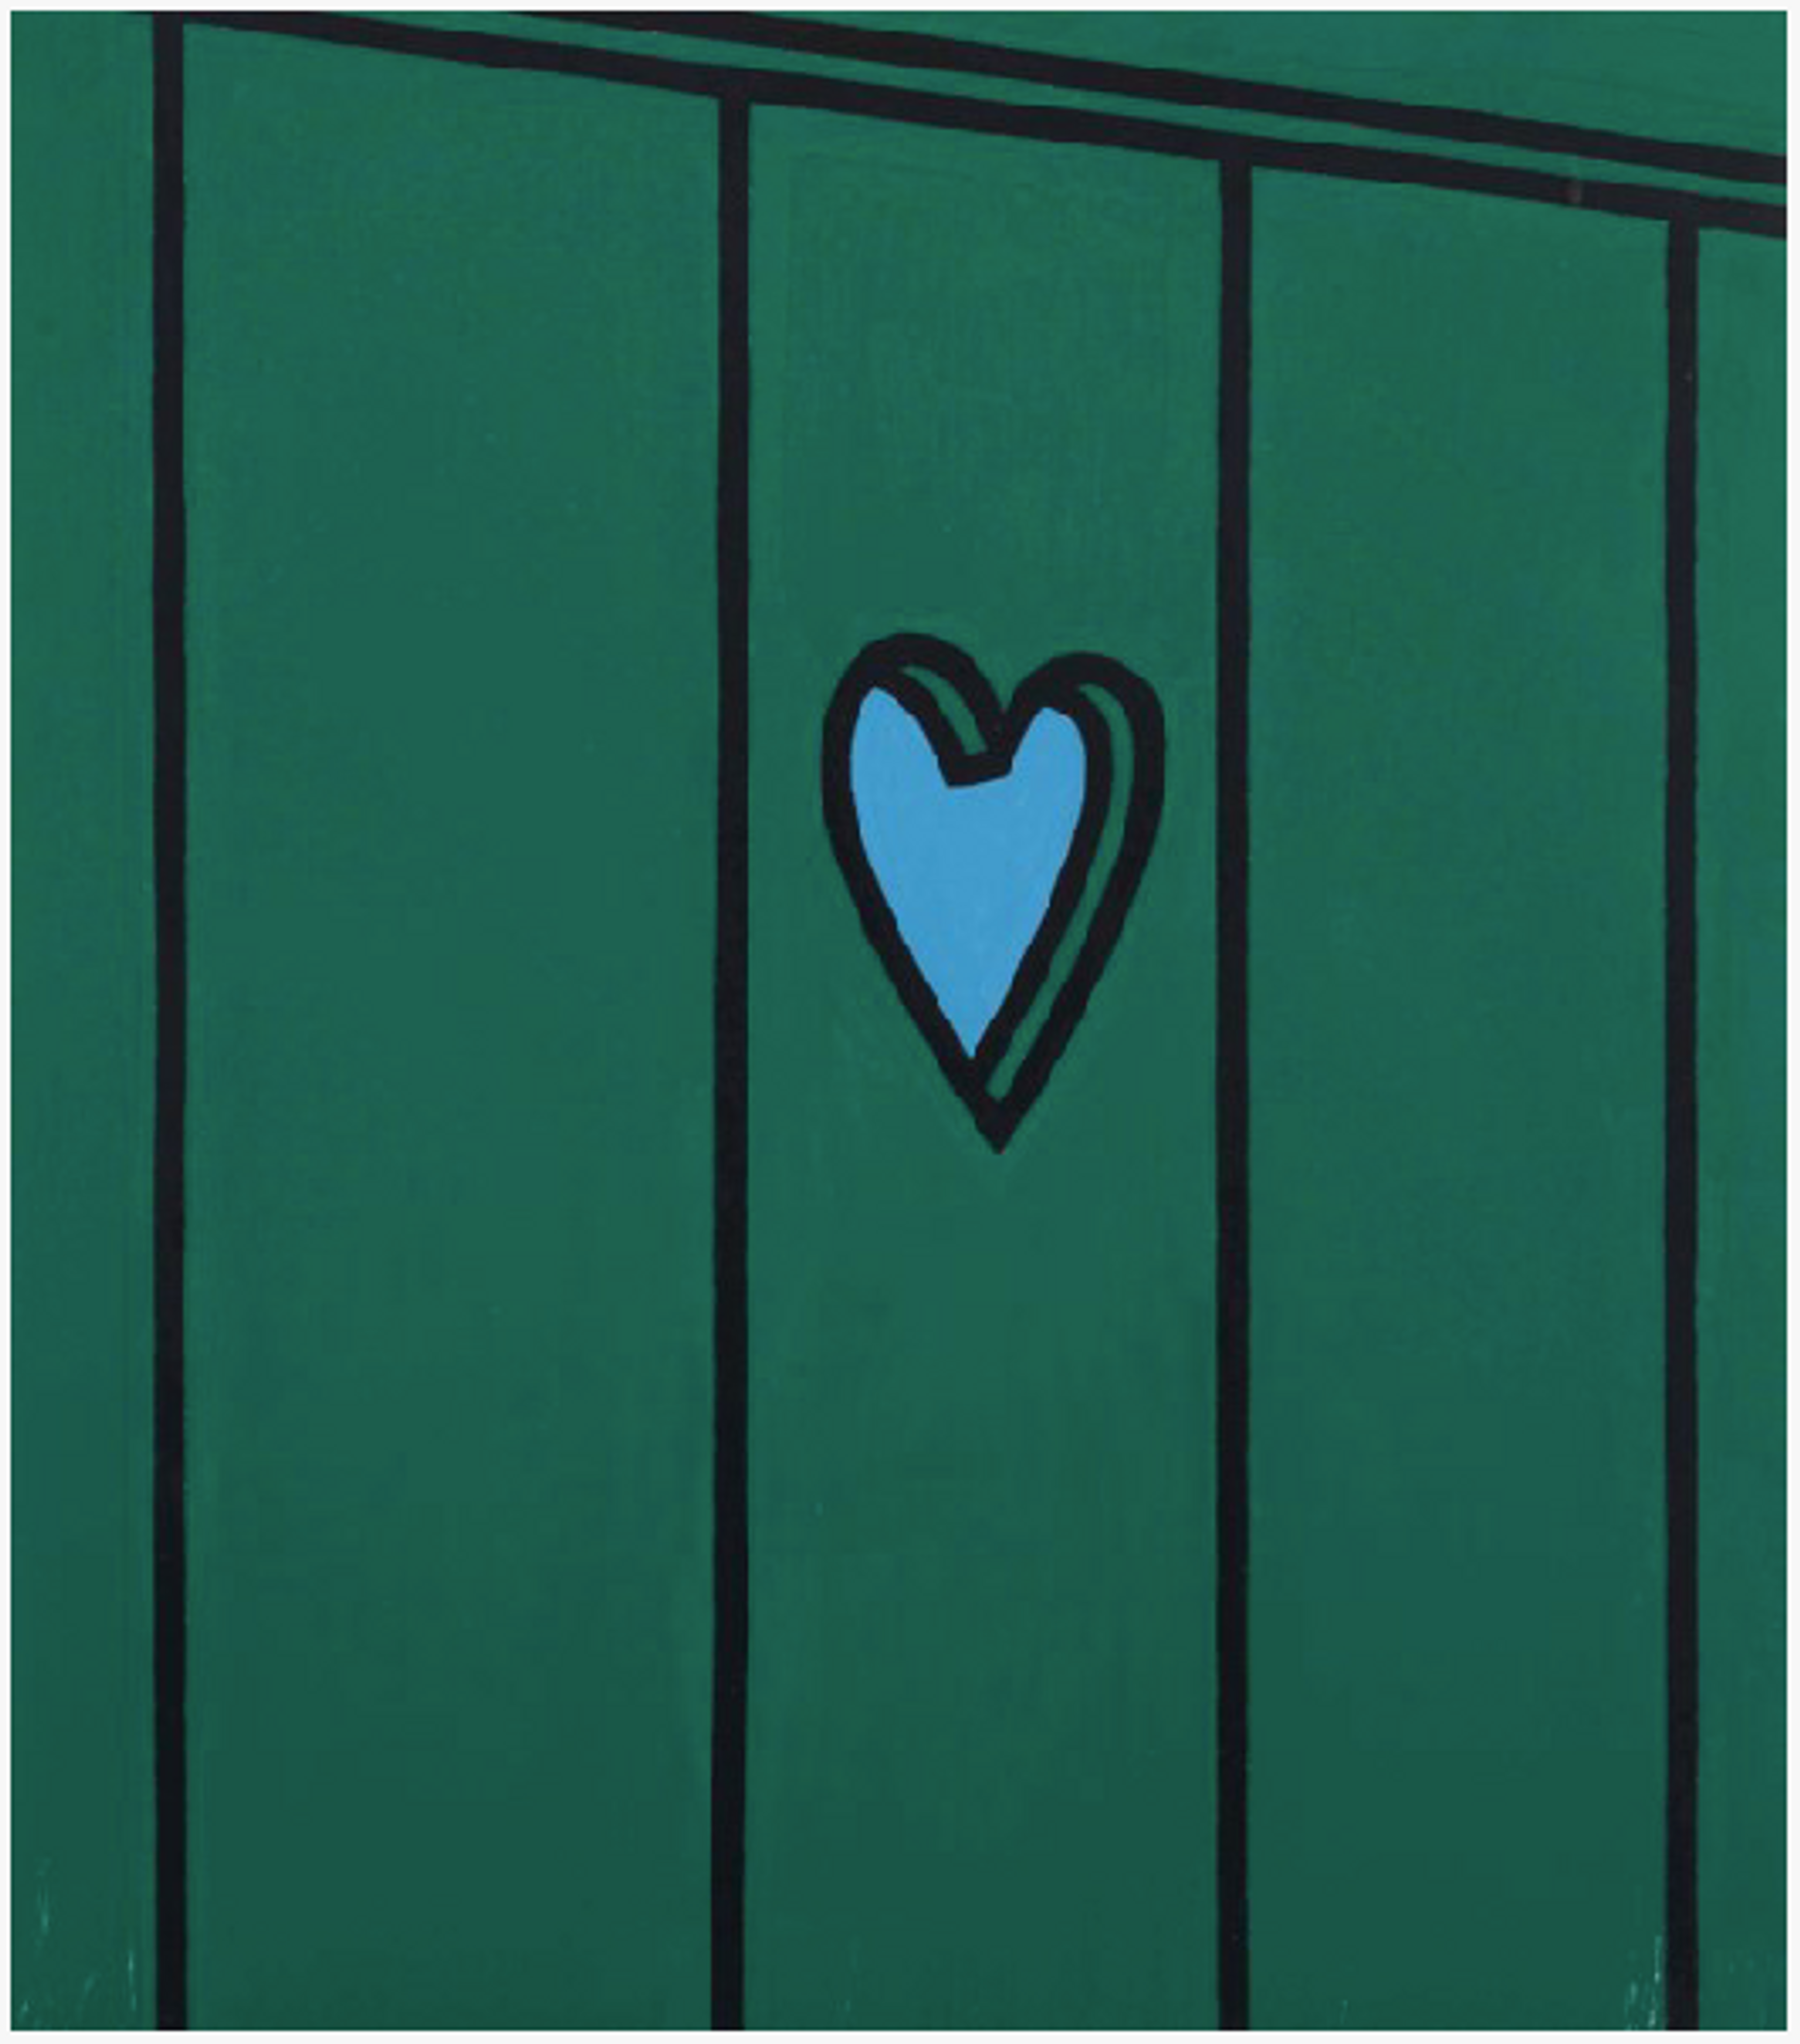 Cropped image of a dark green wooden fence with bold black vertical lines defining individual panels. A small heart-shaped cut-out in the center panel reveals a light blue background.